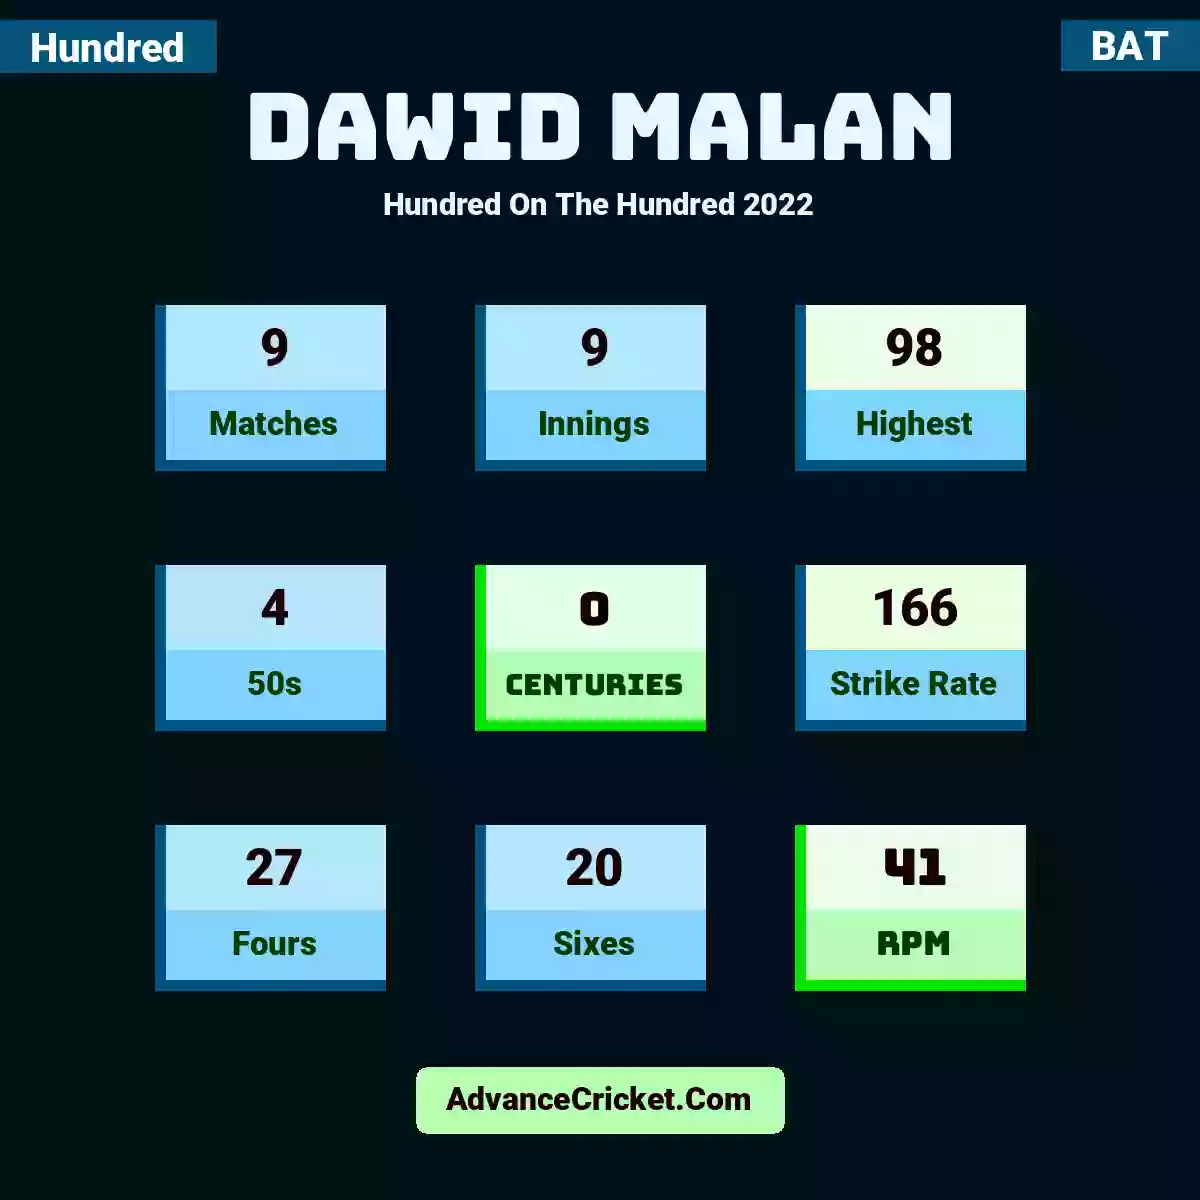 Dawid Malan Hundred  On The Hundred 2022, Dawid Malan played 9 matches, scored 98 runs as highest, 4 half-centuries, and 0 centuries, with a strike rate of 166. D.Malan hit 27 fours and 20 sixes, with an RPM of 41.